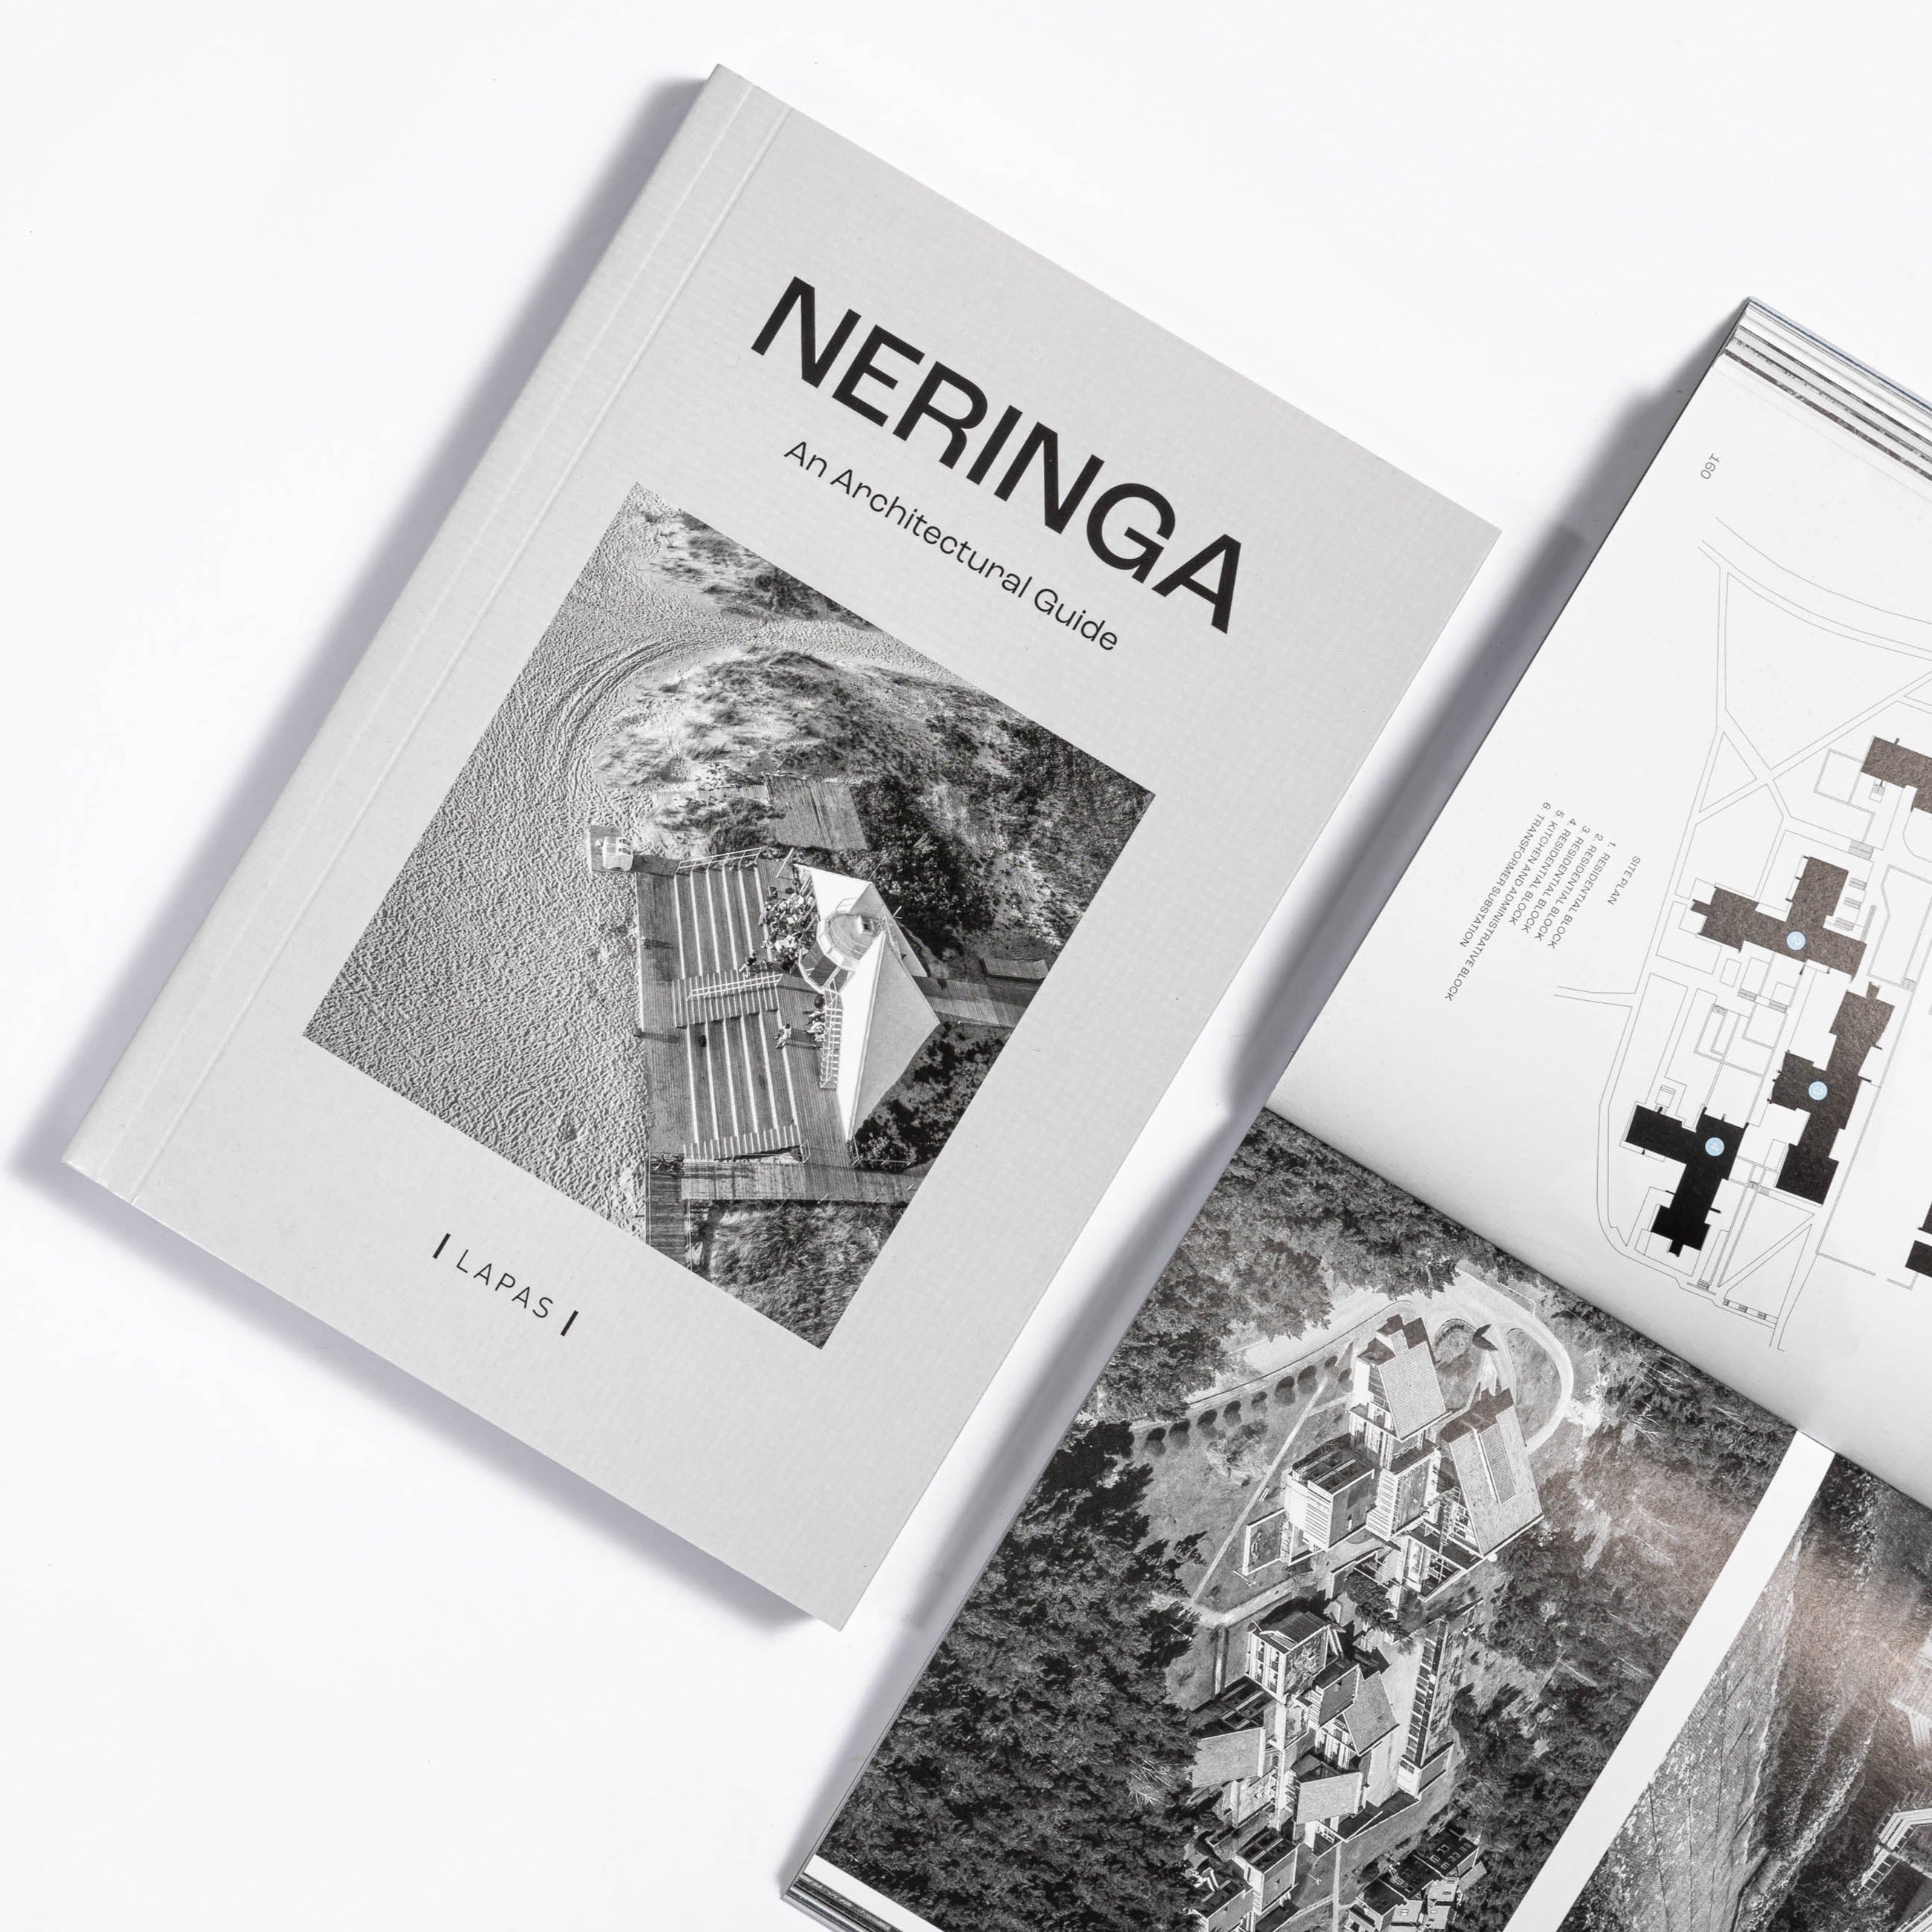 Neringa: An Architectural Guide